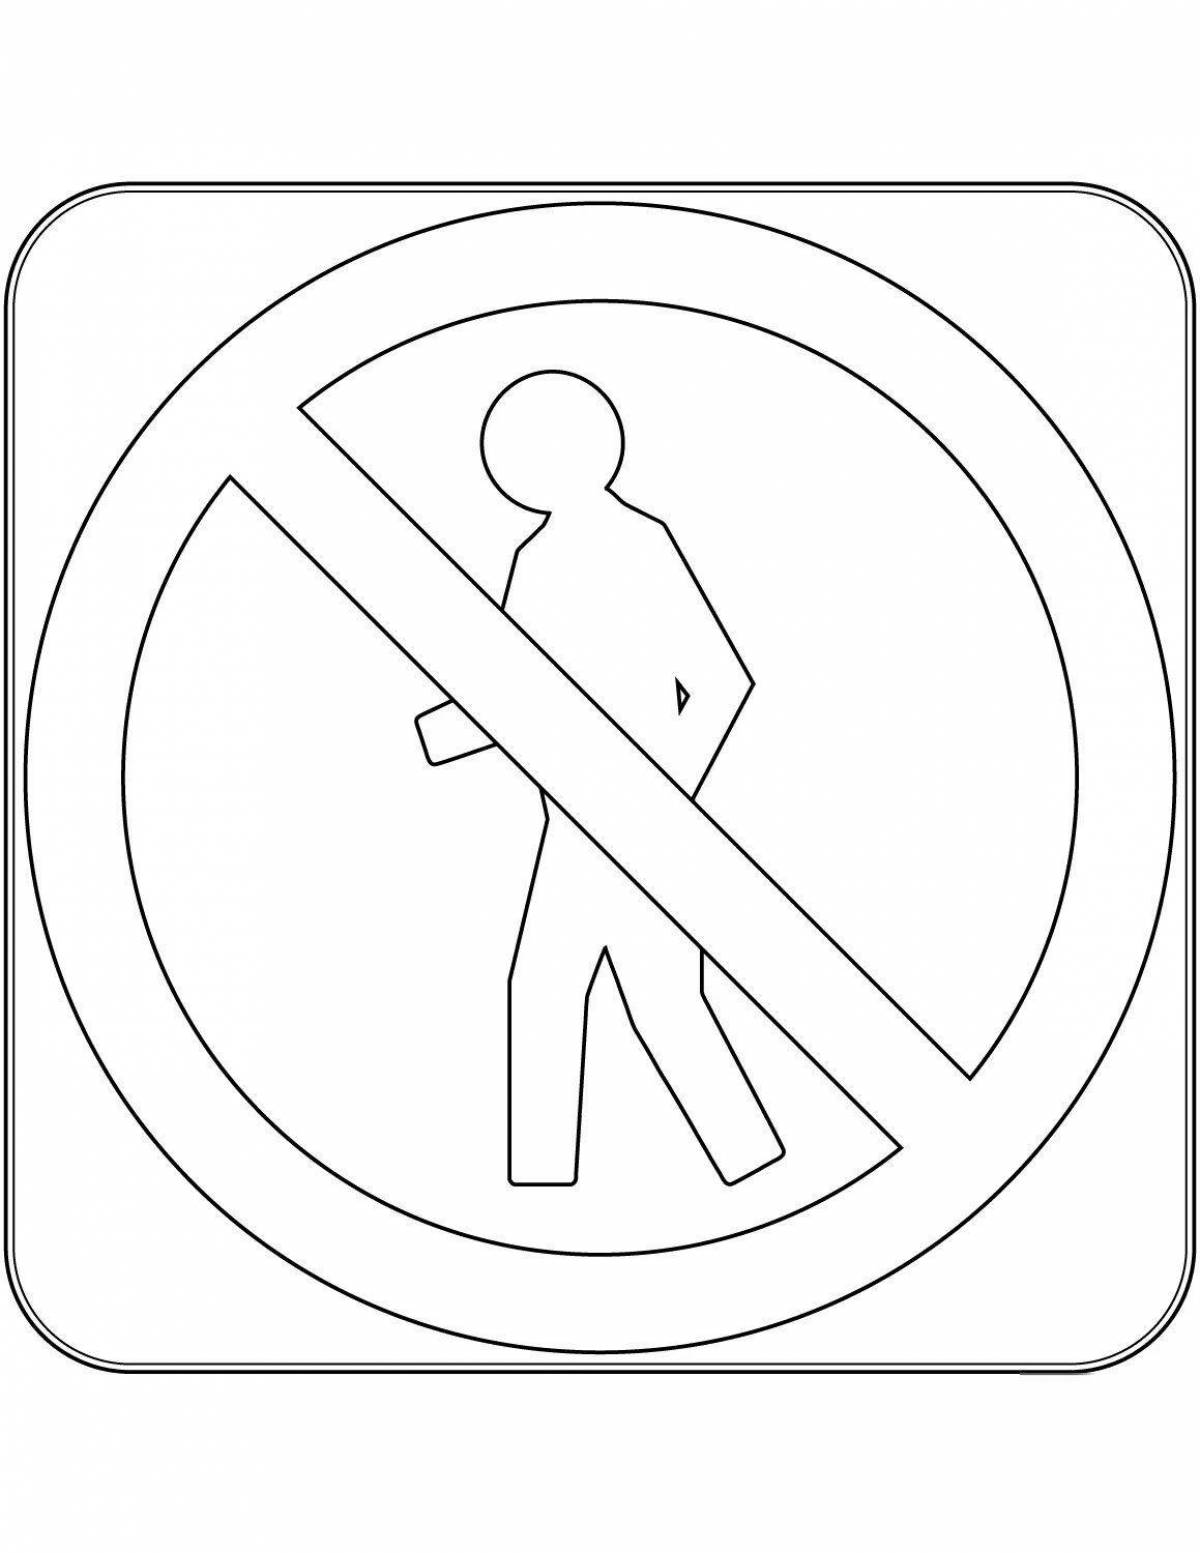 Playful no traffic sign coloring page